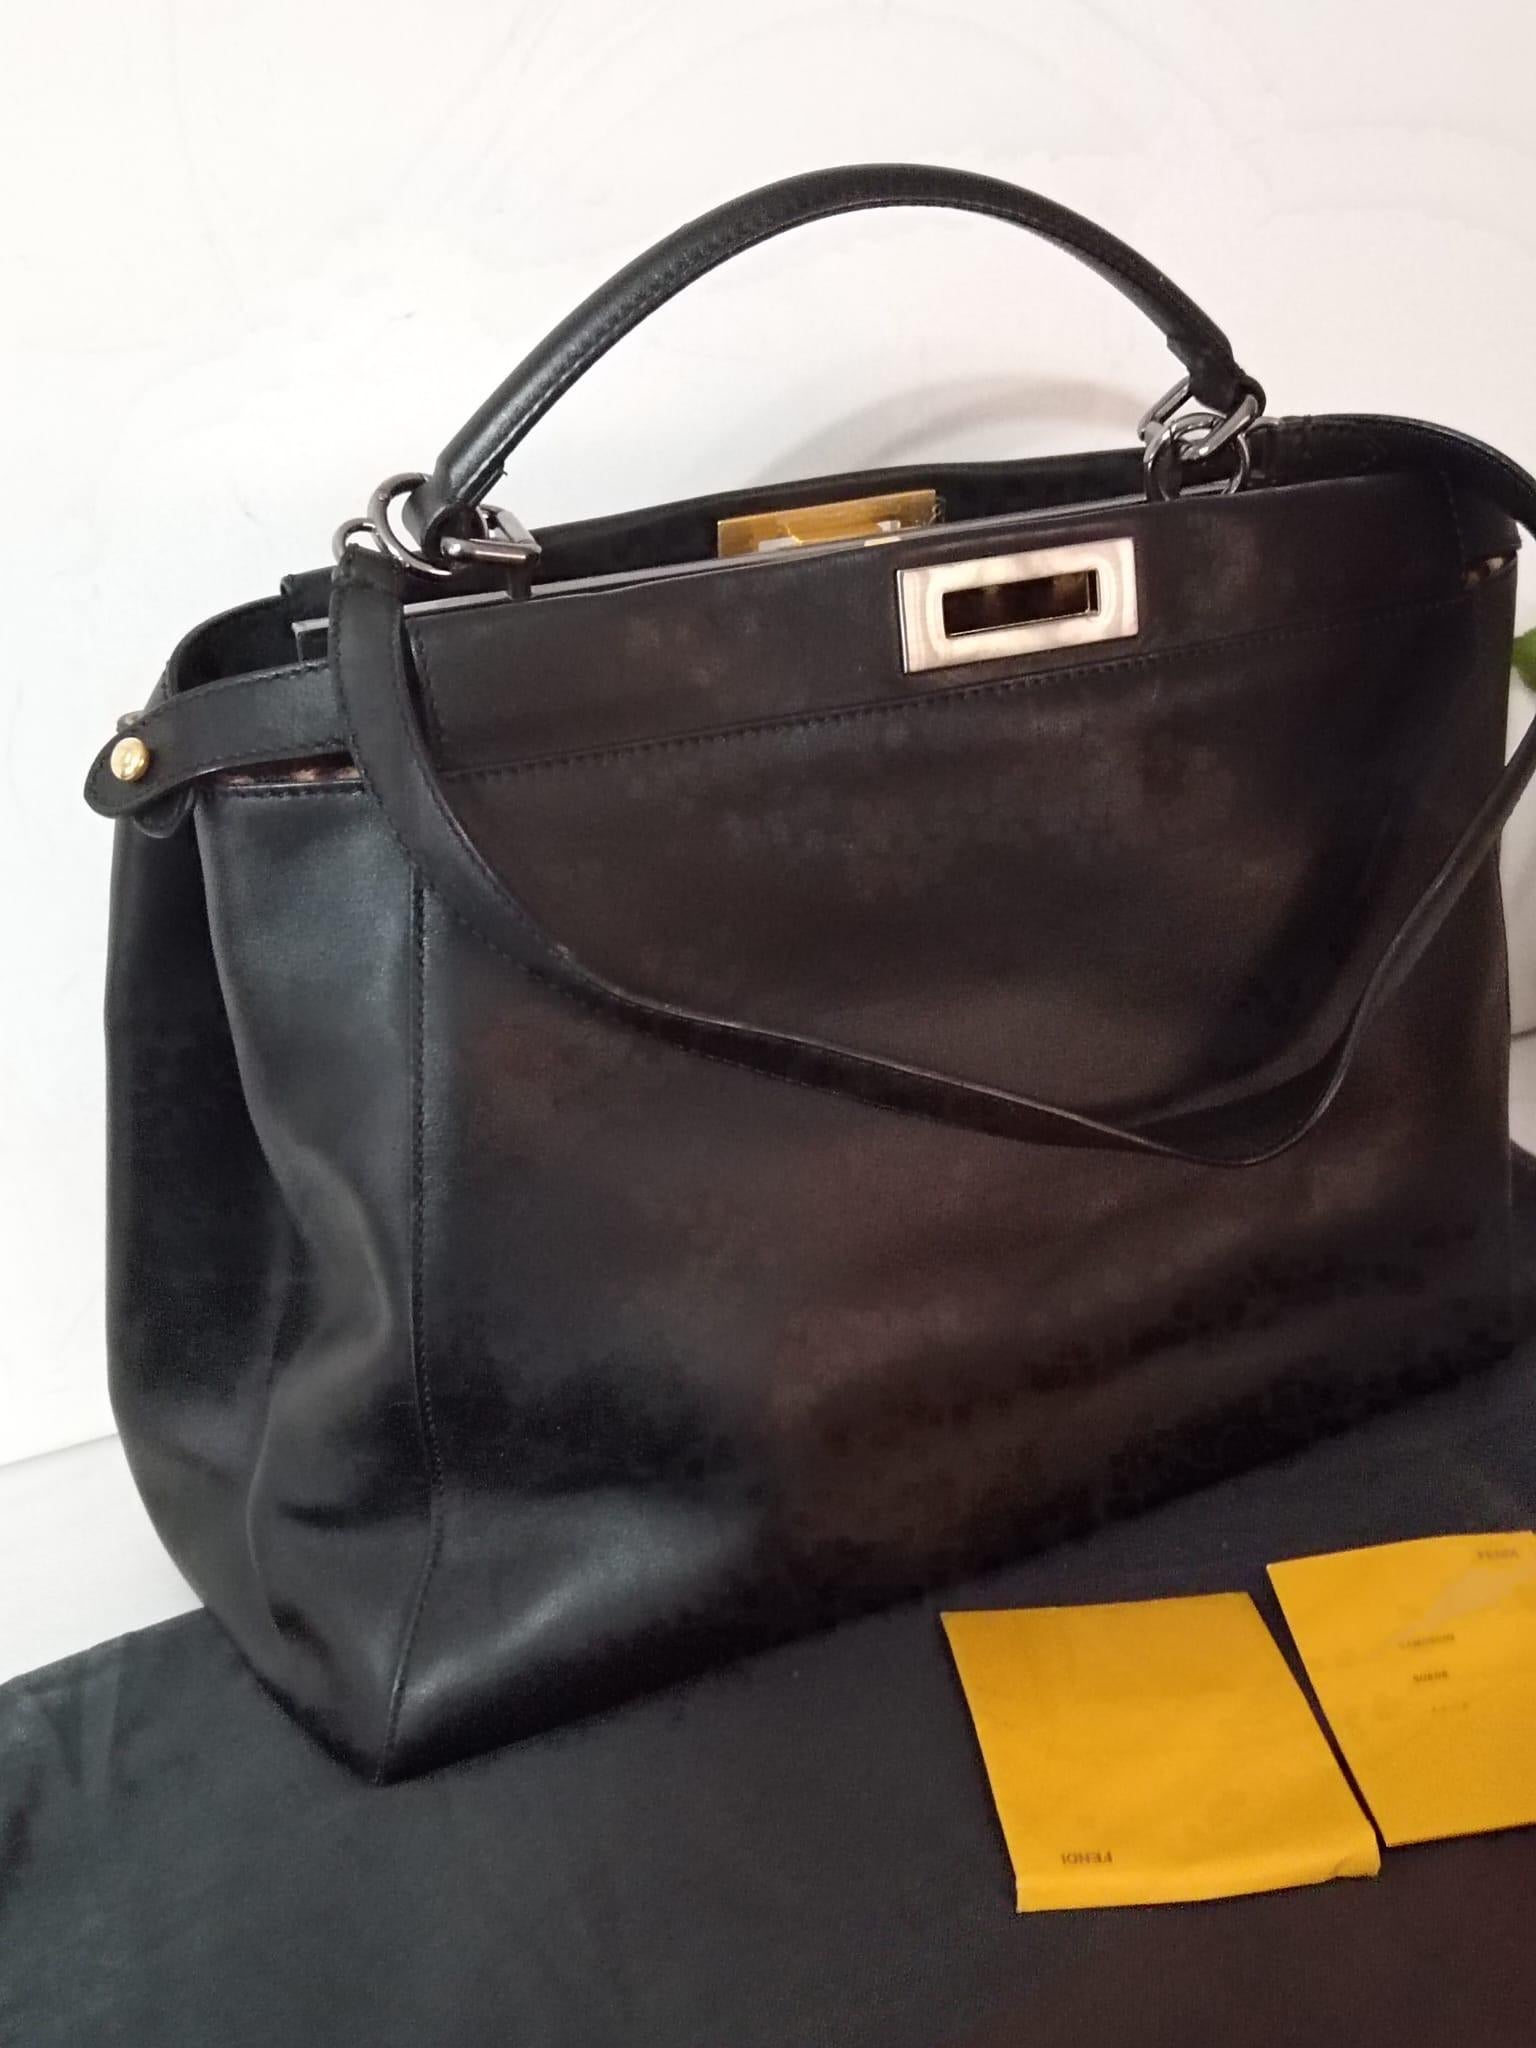 Black Fendi Peekaboo bag with animal pony skin and alcantara interior, Excellent overall condition, complete with dust with foil on metalwork
Iconic bag and suitable for everyone, you can carry it by hand or over the shoulder thanks to the included